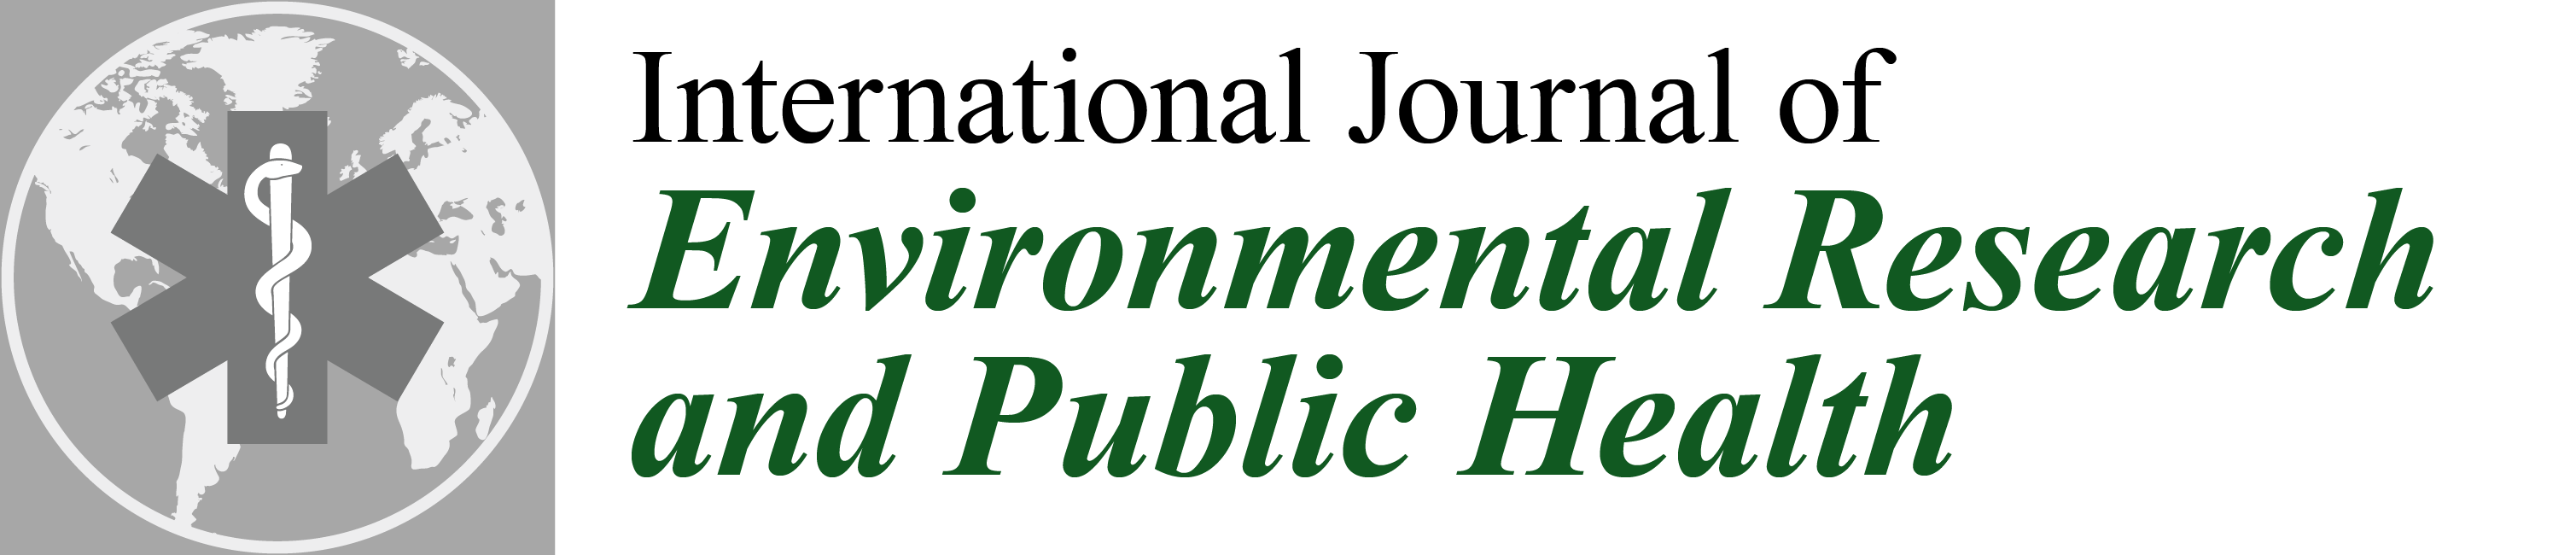 International Journal of Environmental Research and Public Health | An ...